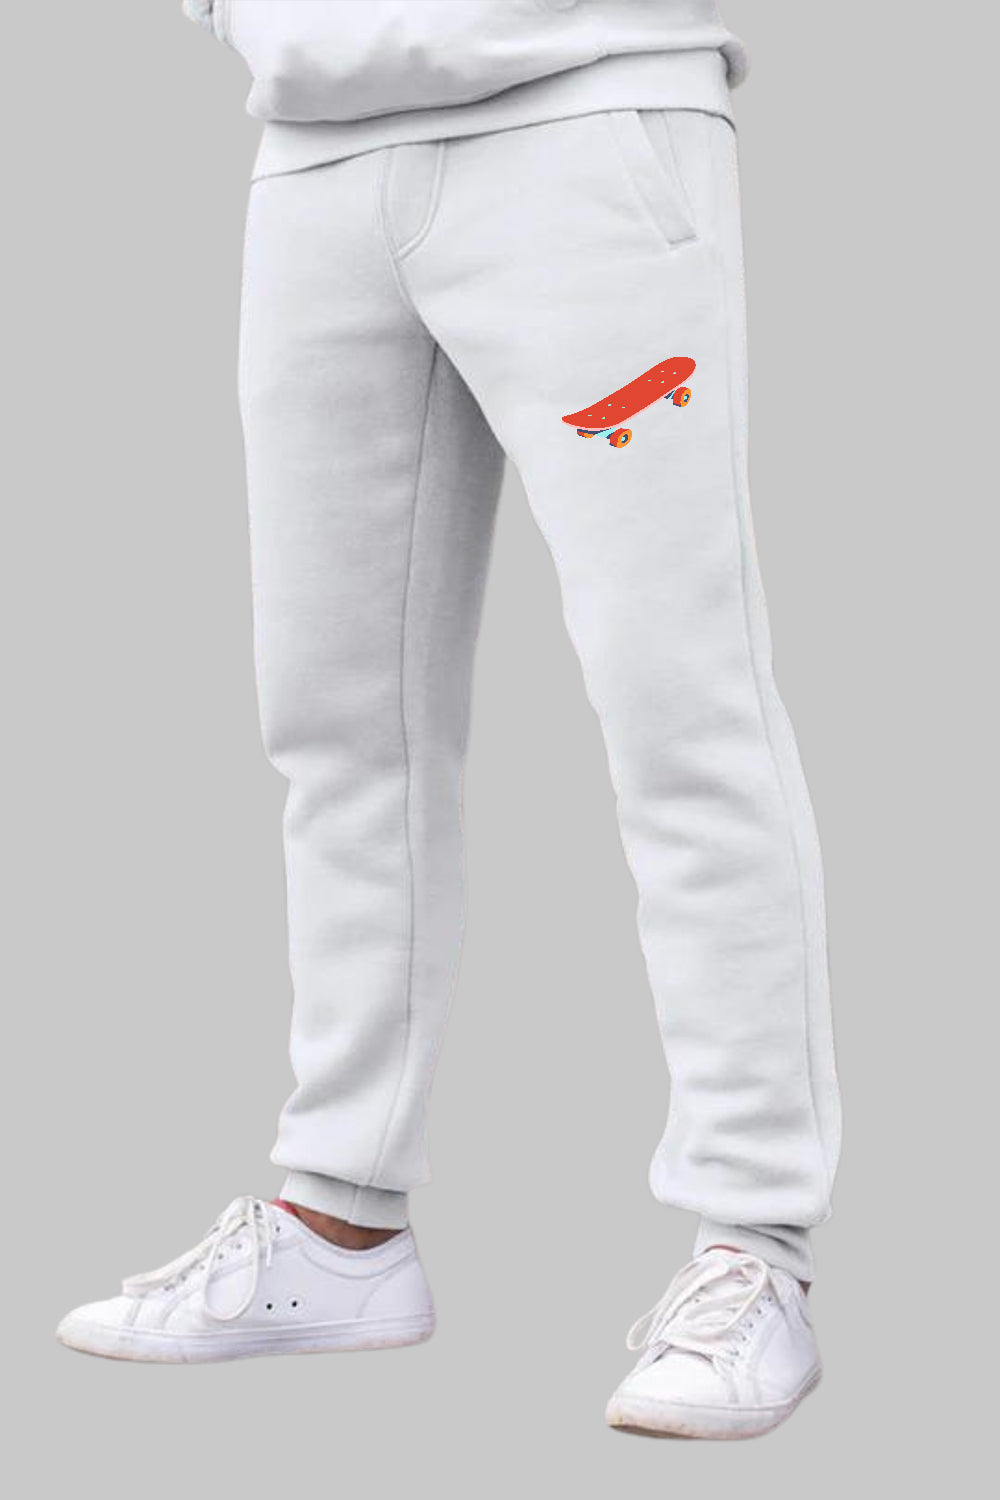 Skateboard Graphic Printed White Joggers